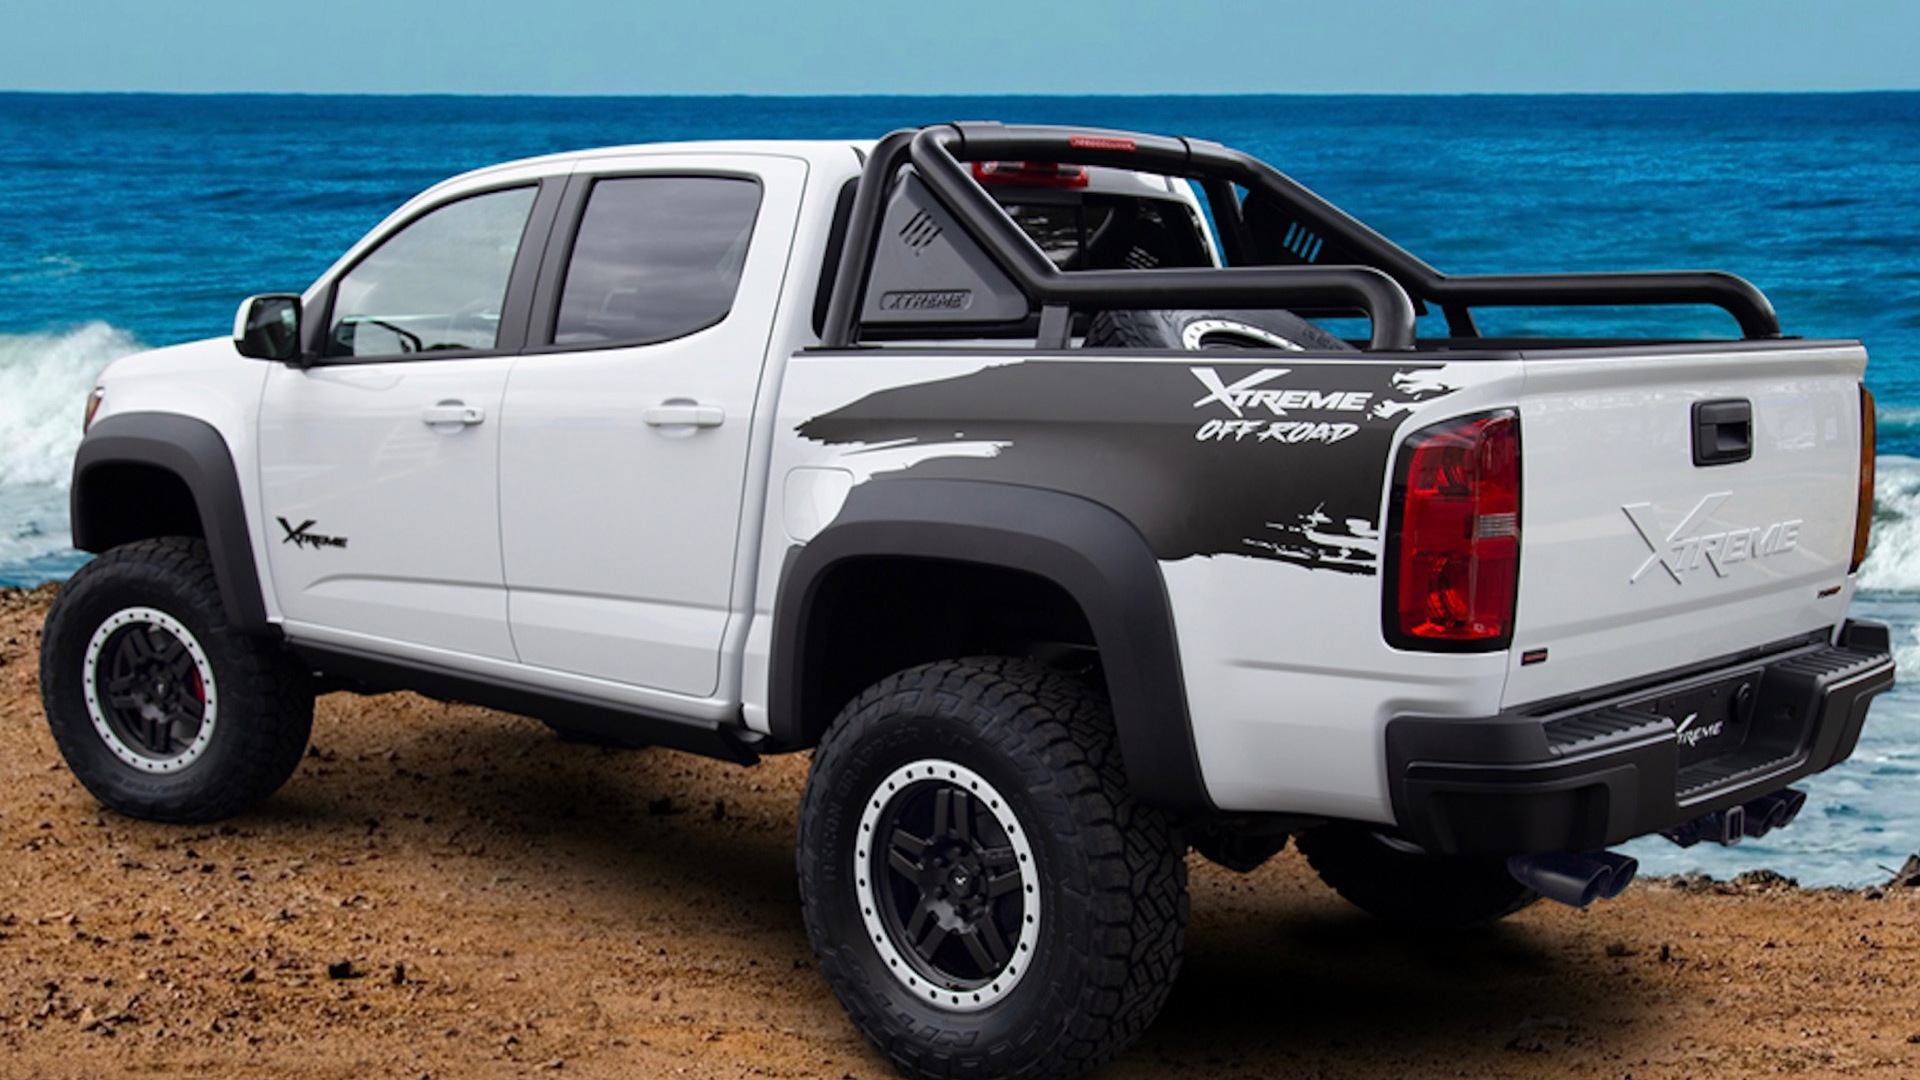 2022 Chevrolet Colorado ZR2 Xtreme Off-Road by Specialty Vehicle Engineering